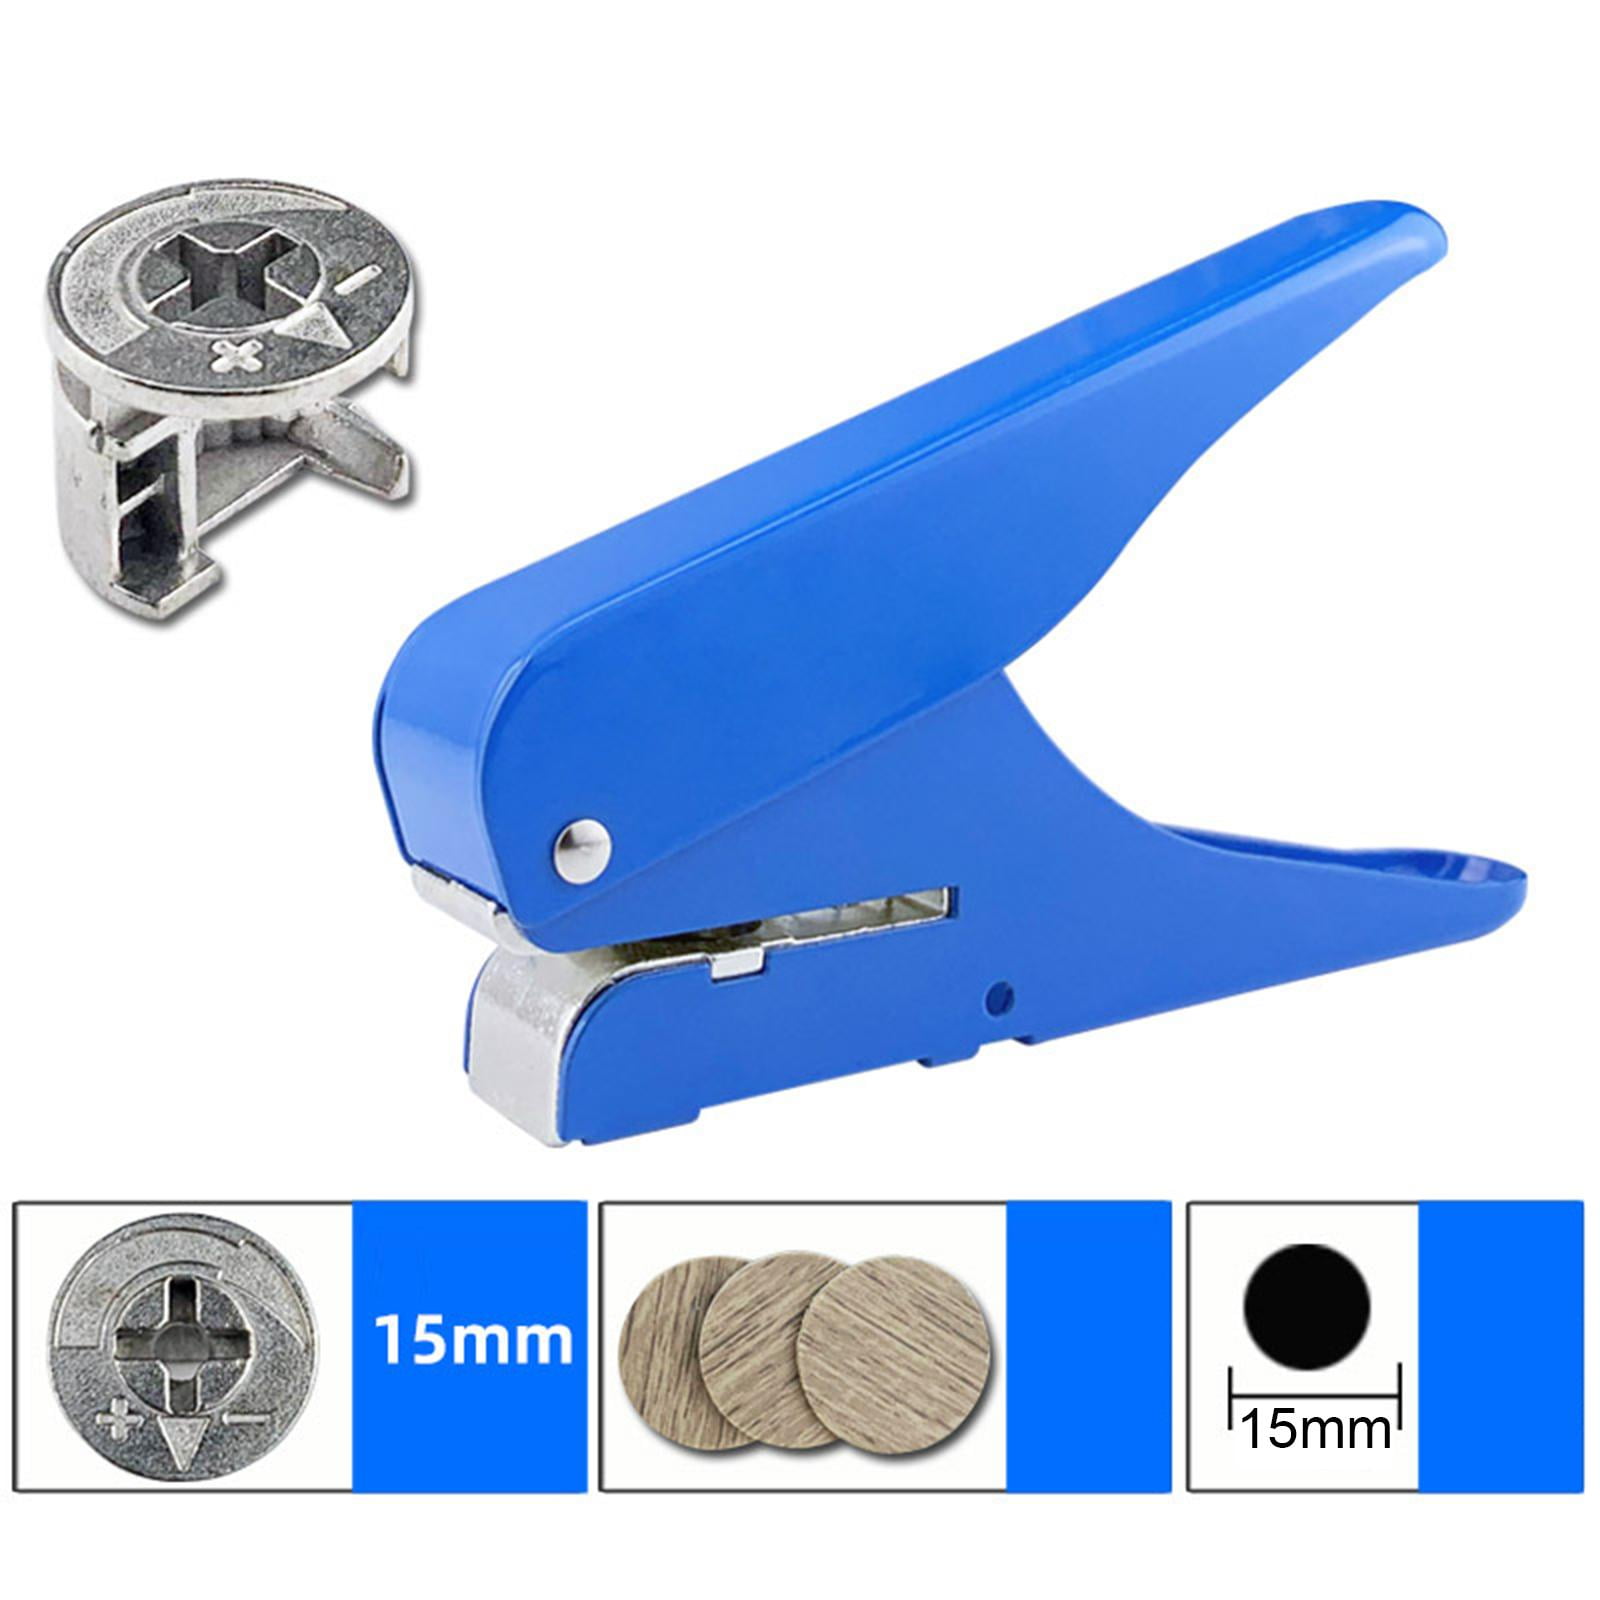 Star Shaped Hole Puncher Paper Craft Hole Punch Three-Star Hole Puncher